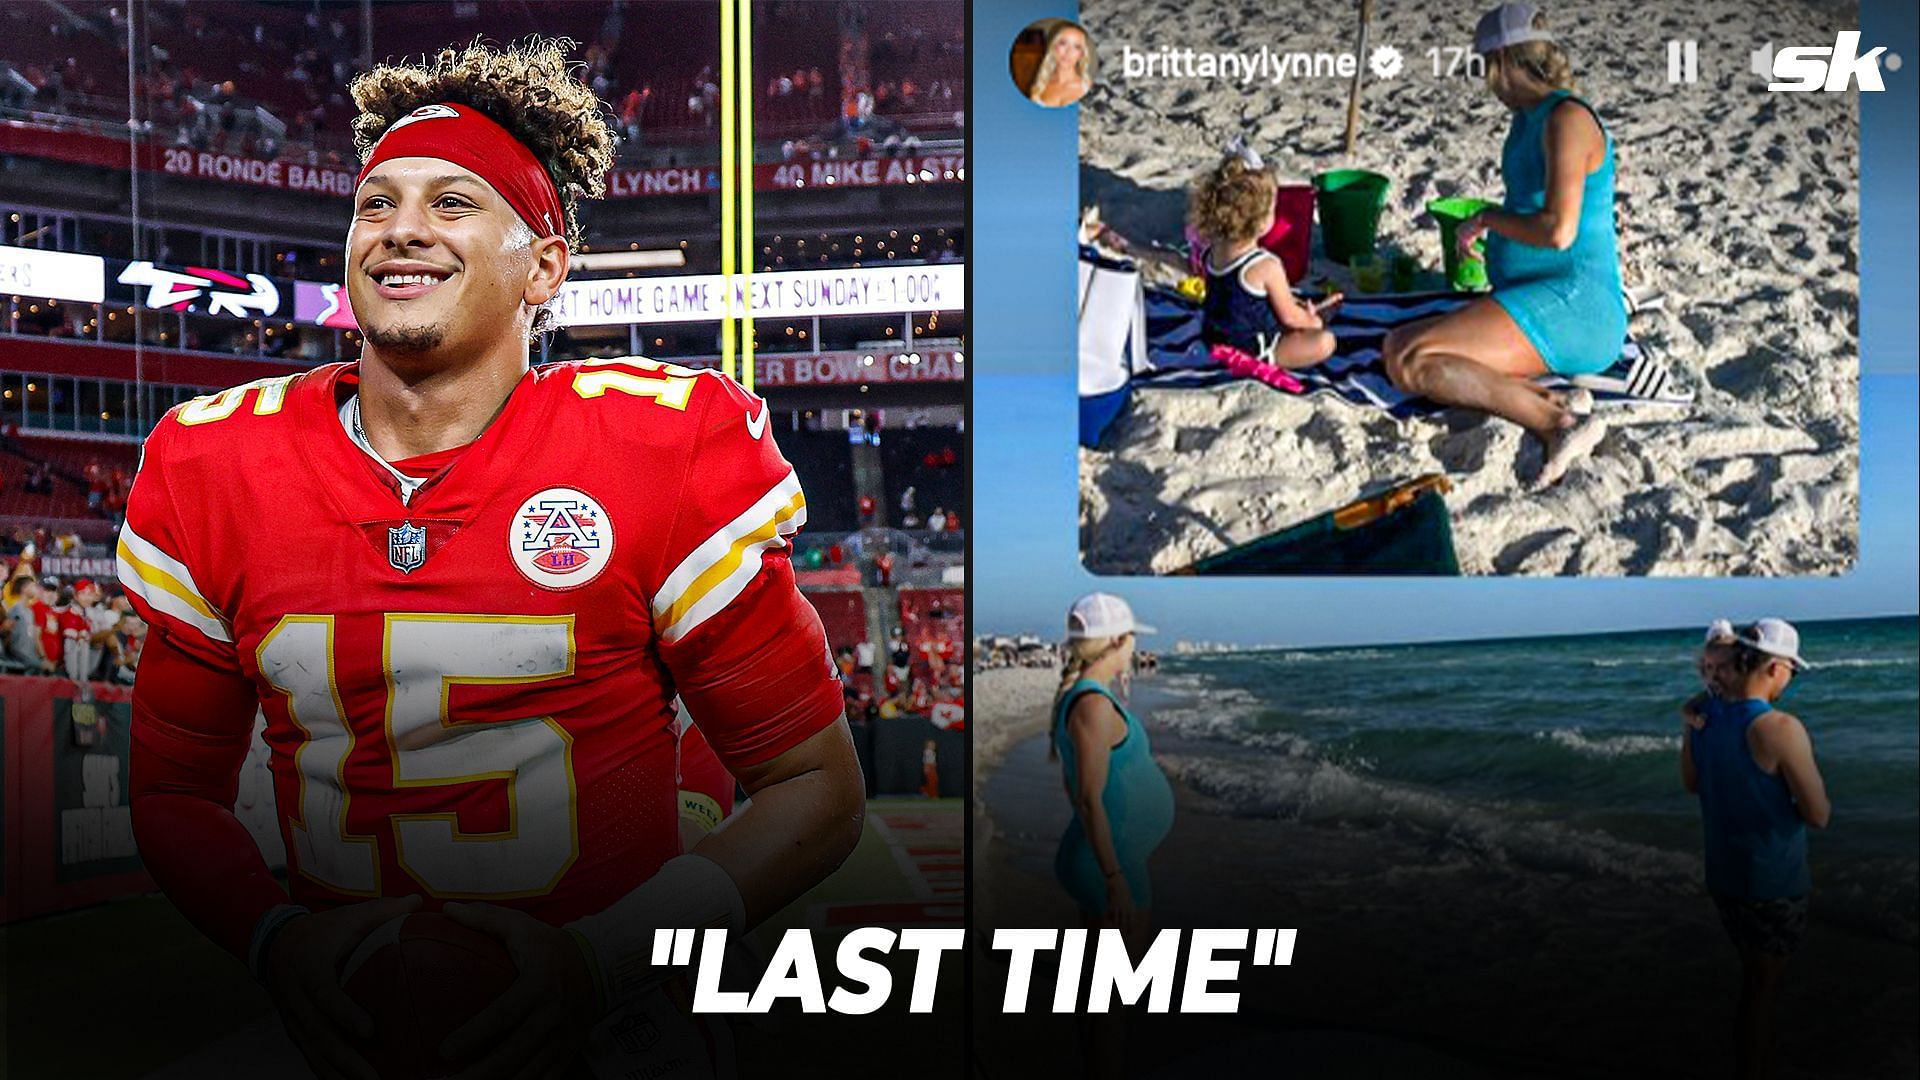 Patrick and Brittany Mahomes went on one last vacation before the arrival of their second baby